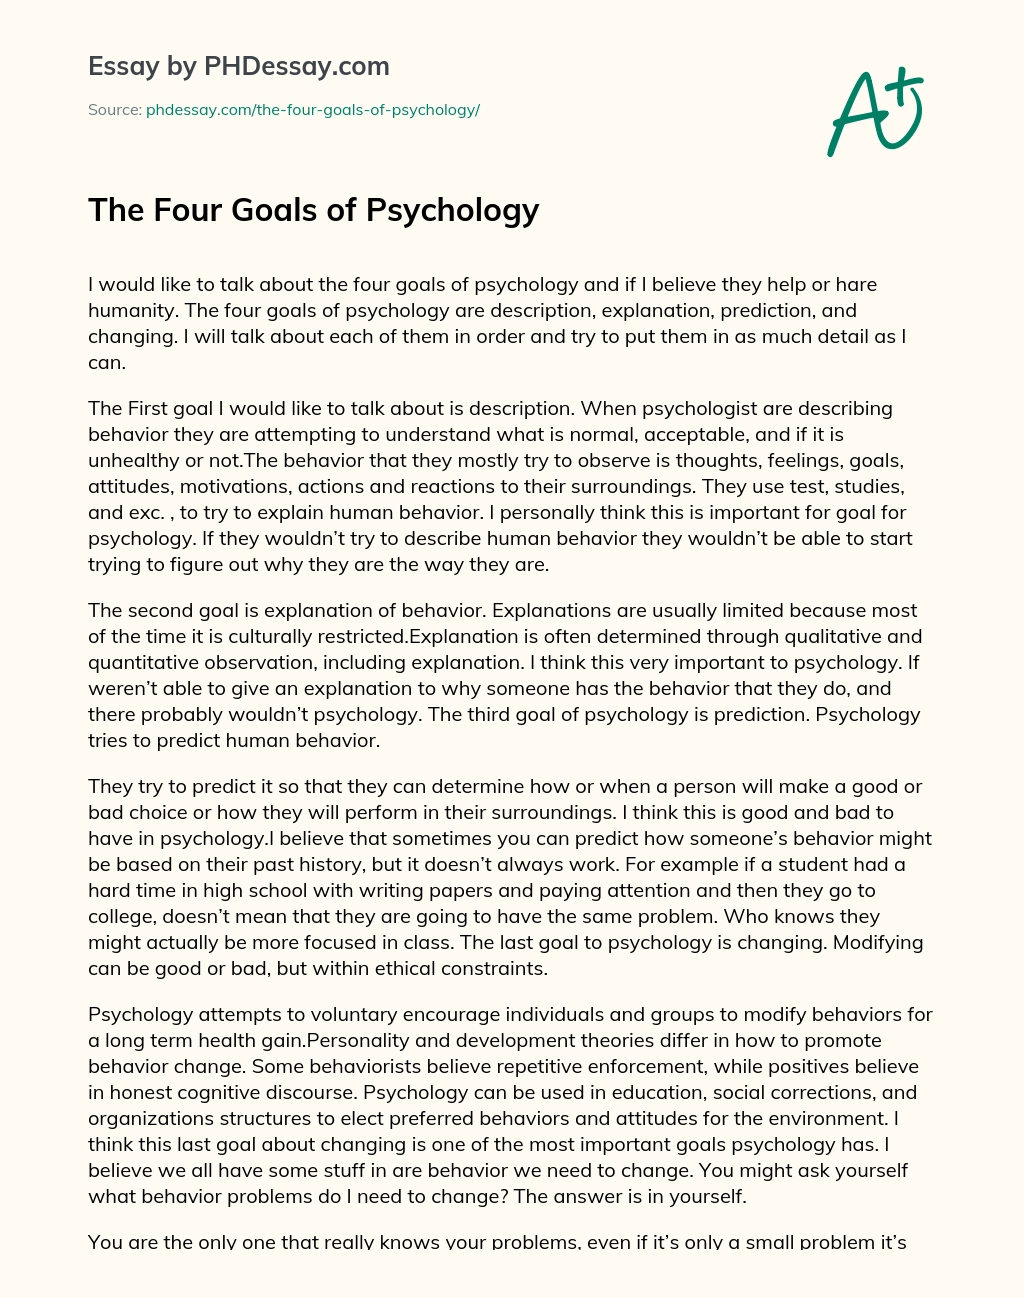 The Four Goals of Psychology essay